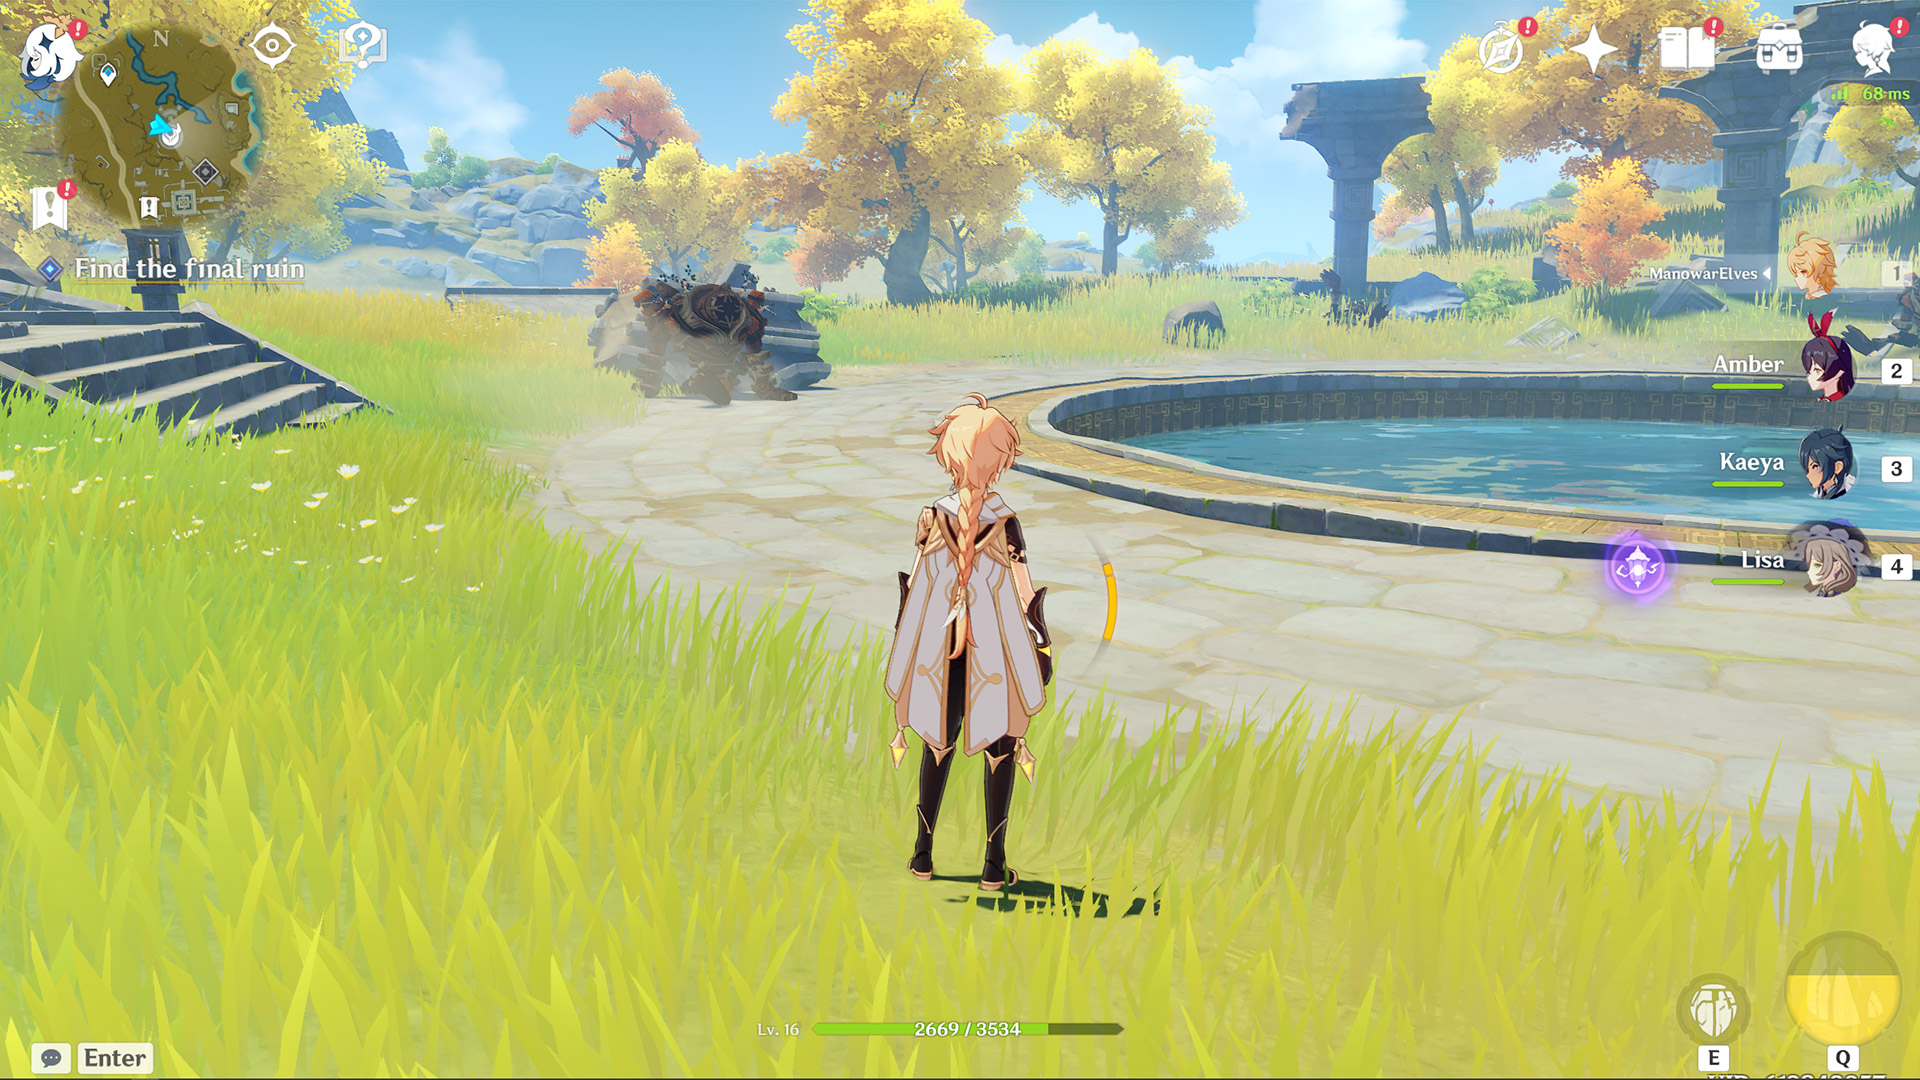 The main character standing near a pool.